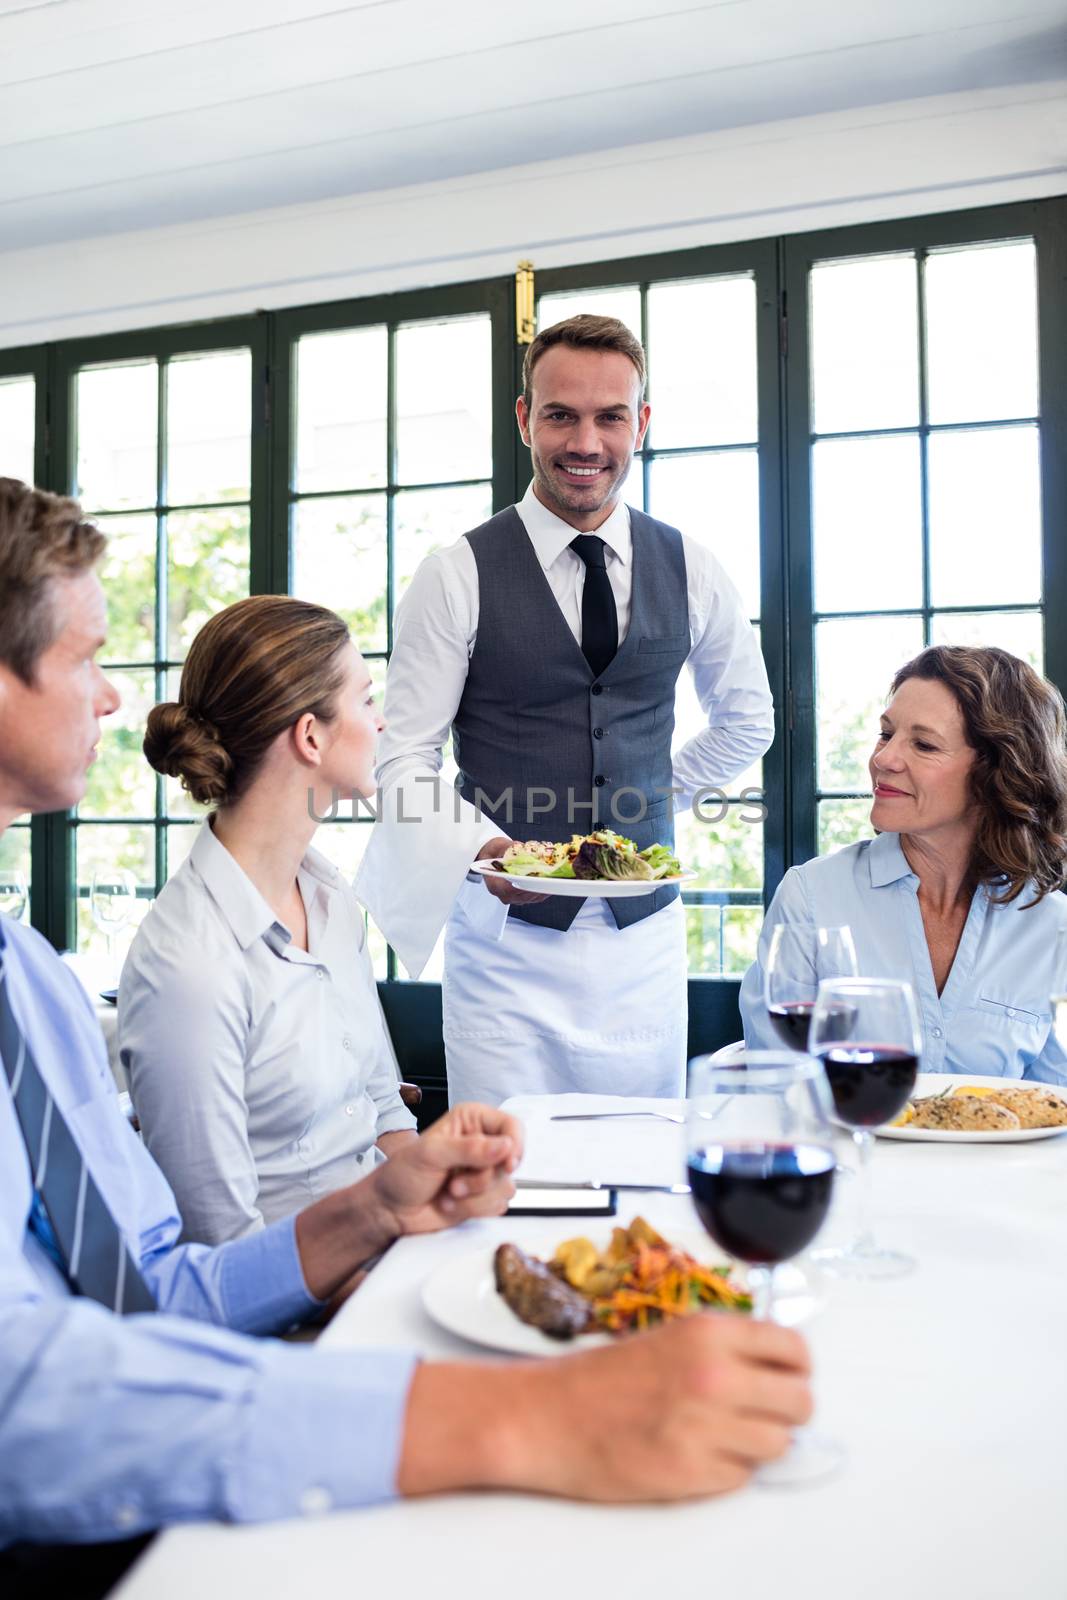 Waiter serving salad to business people by Wavebreakmedia